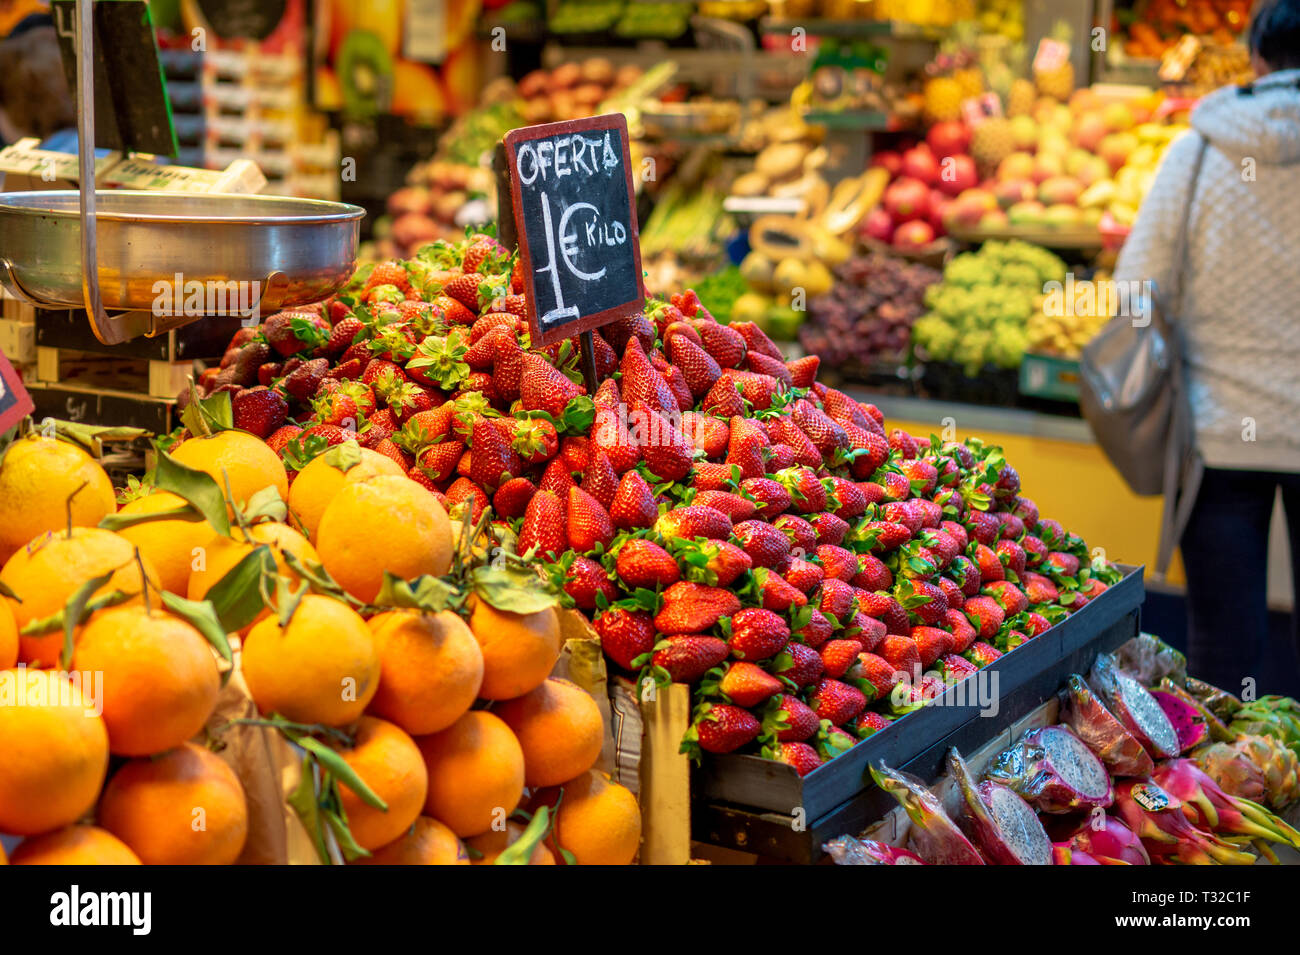 strawberry 1 Euro offer on farmers market in Spain Malaga with other fruits Stock Photo